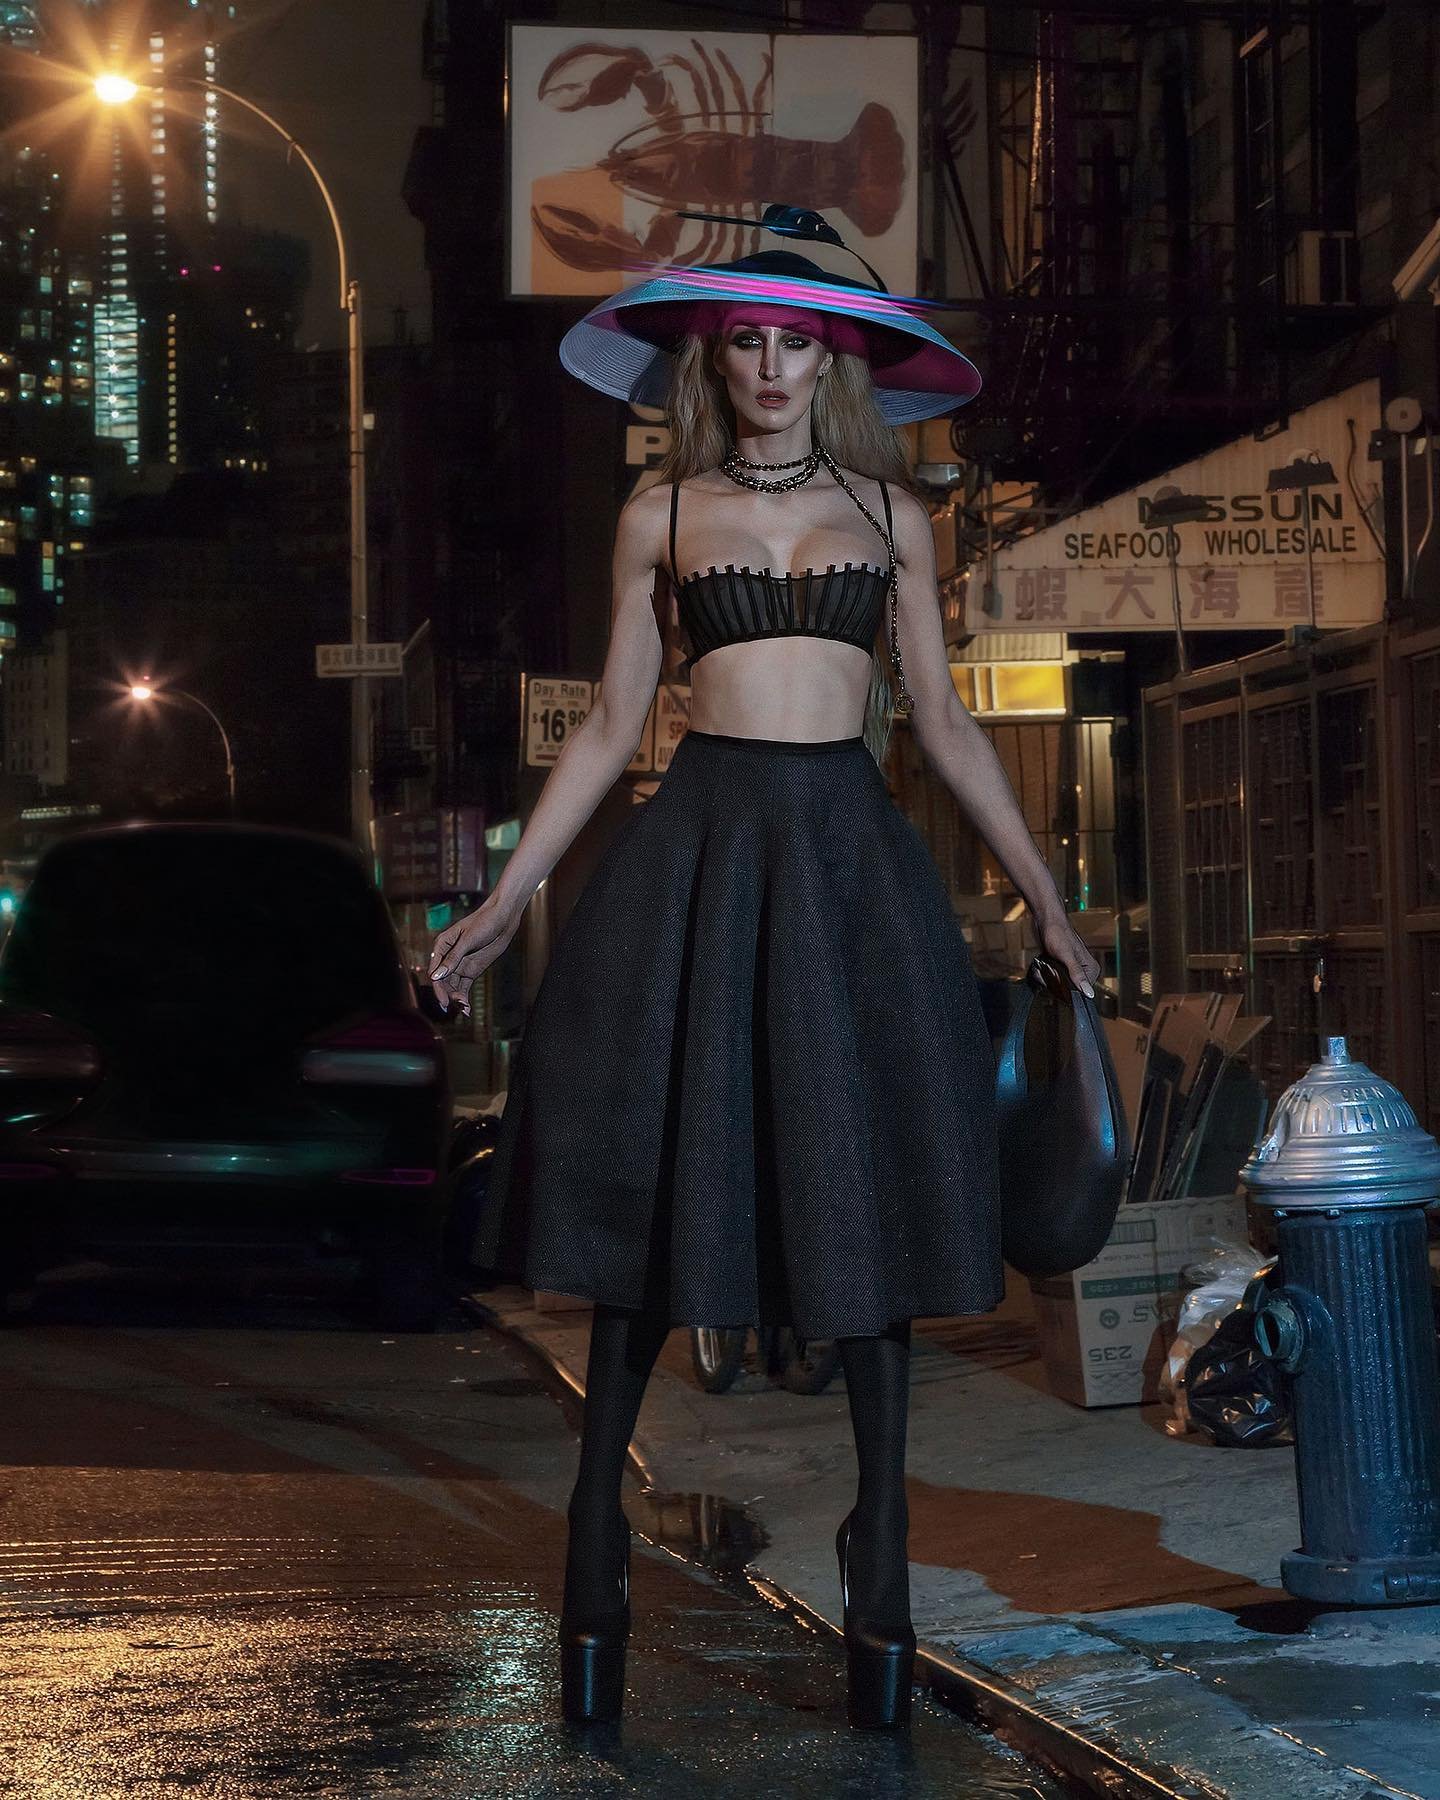 Dylan Monroe, Chinatown, NY, 2016.

The beautiful @philiptreacy hat my late friend Dylan wears was lent to us for our shoot by my art mentor &amp; dear friend @akakceh. It belonged to one of the most fabulous, true eccentrics to have ever walked this